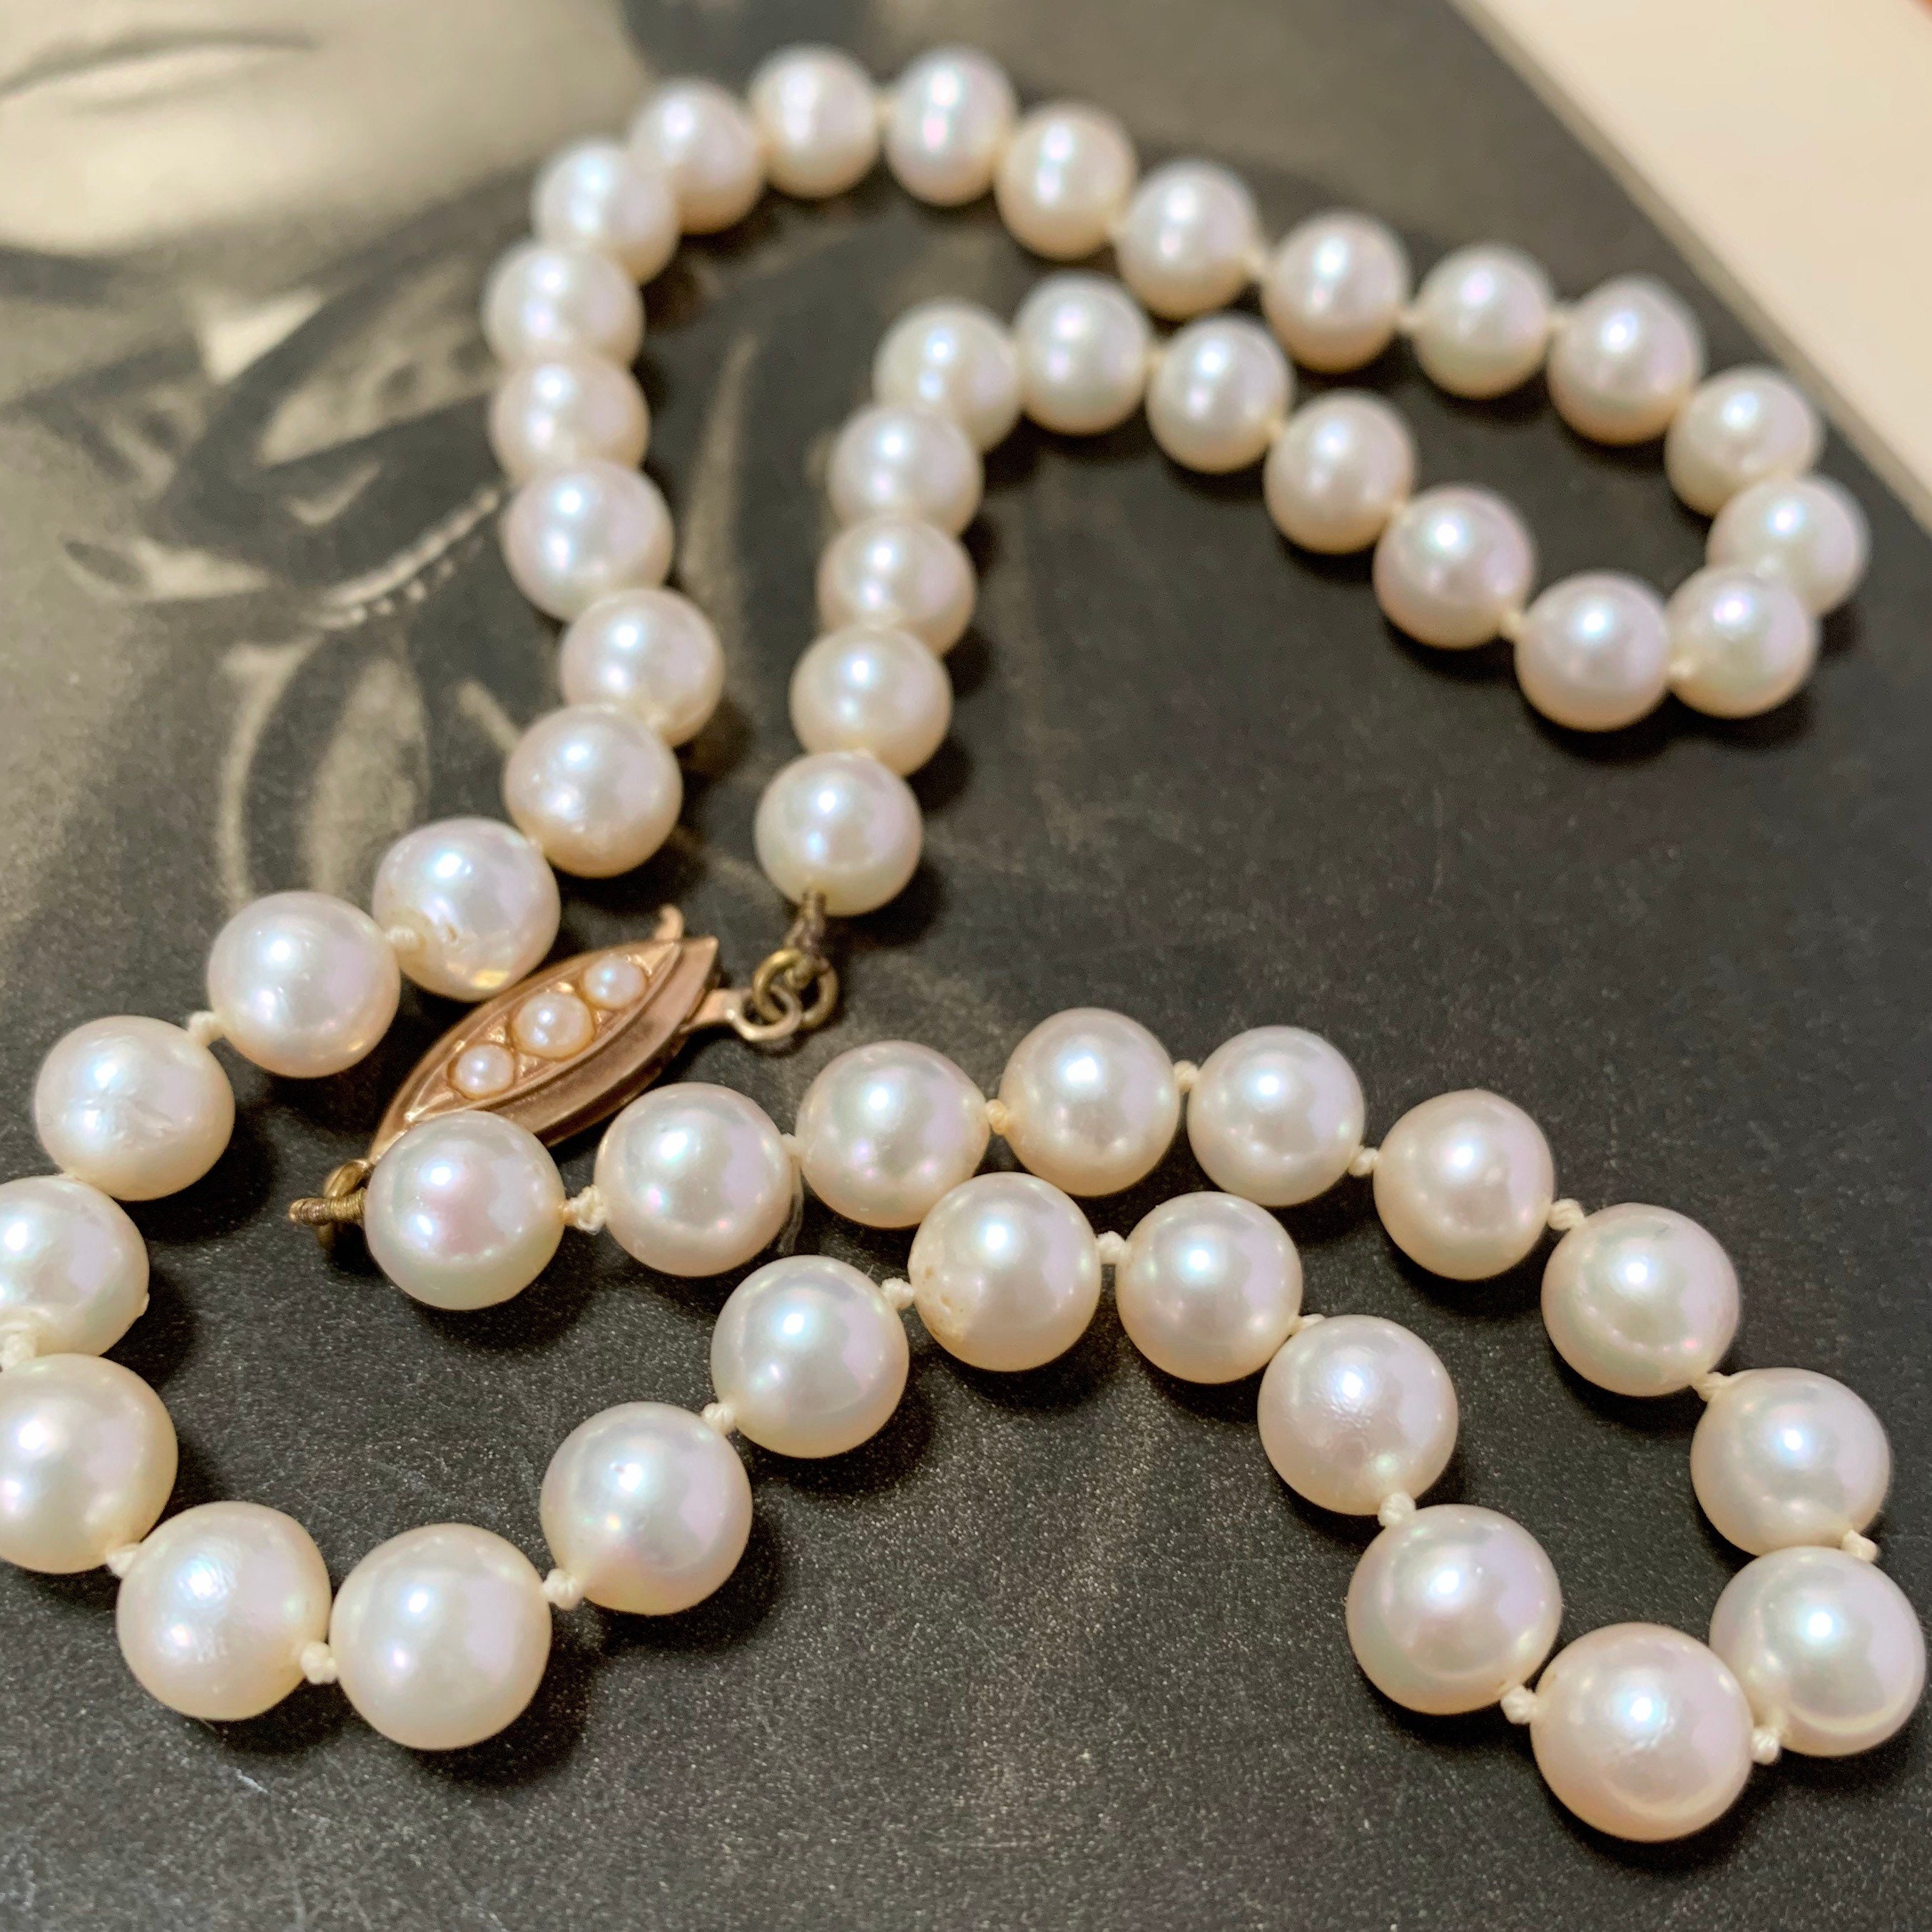 Pearl Necklace 16.5 Inches Large 7.6mm Cultured Pearls With 9Ct Gold Seed Clasp Vintage Hallmark Dates 1980S